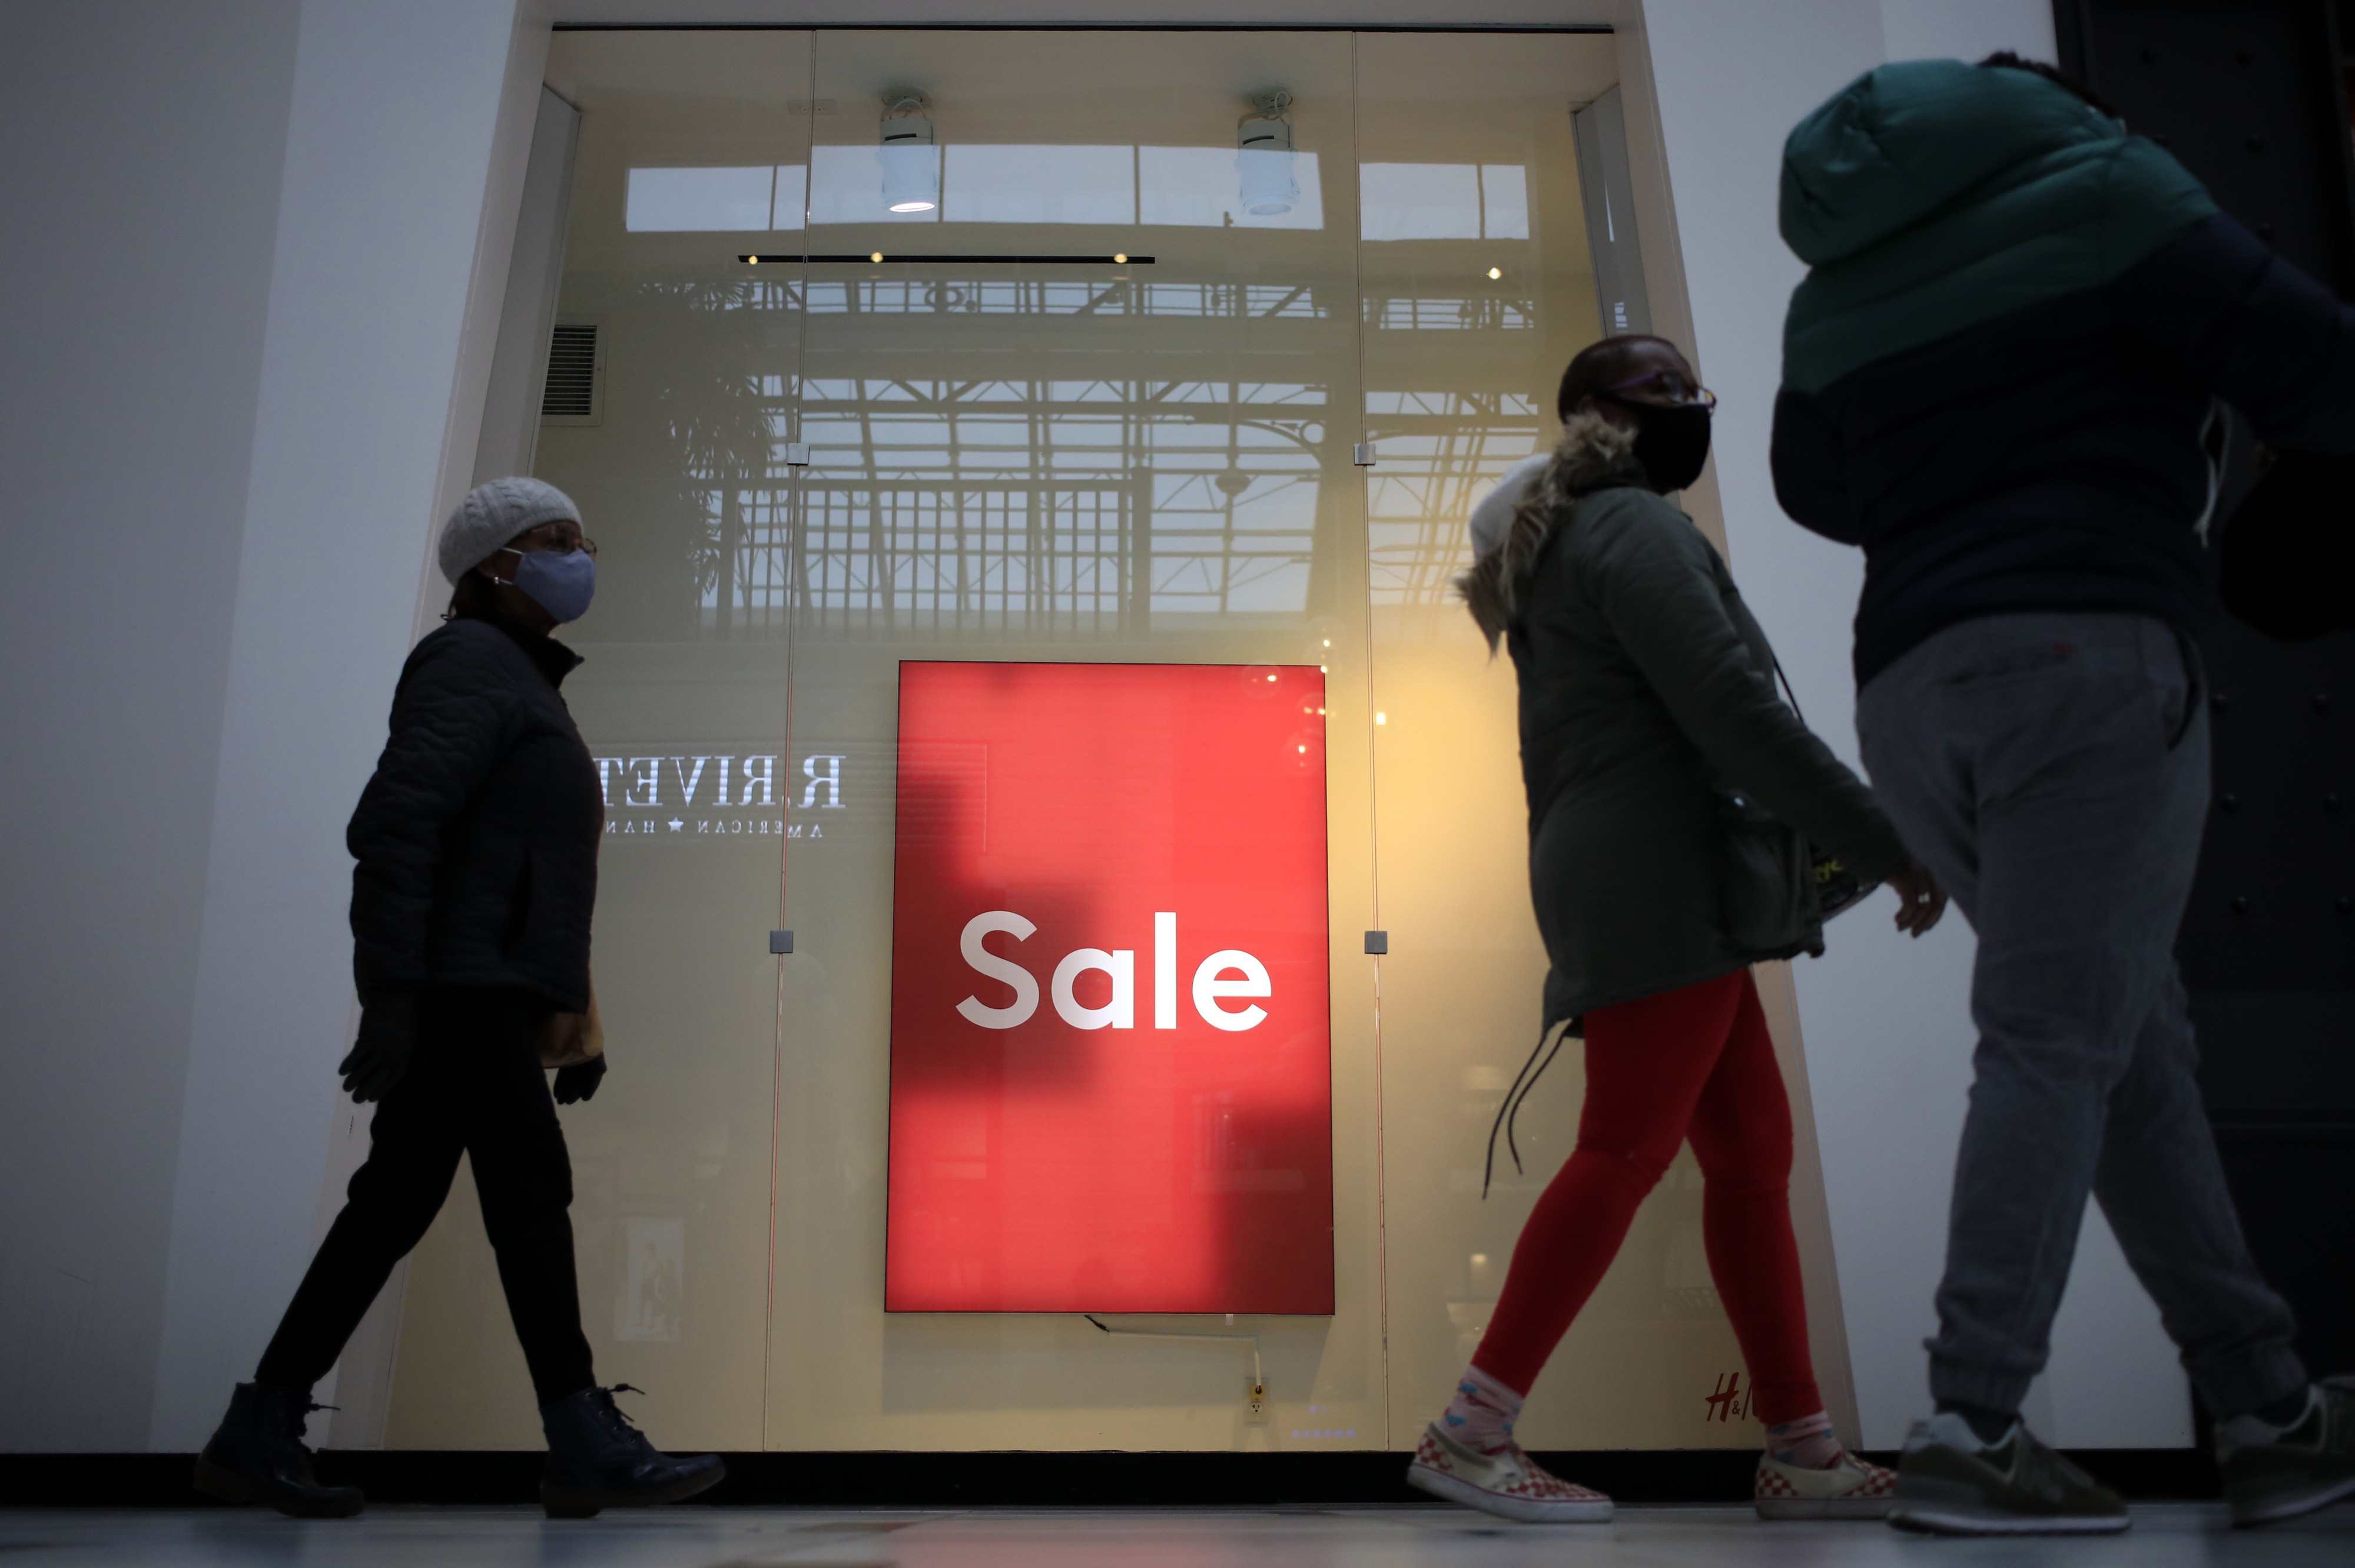 Shoppers walk past a "Sale" sign outside a store at the Easton Town Center Mall in Columbus, Ohio, on Jan. 7. CREDIT: Luke Sharrett/Bloomberg via Getty Images